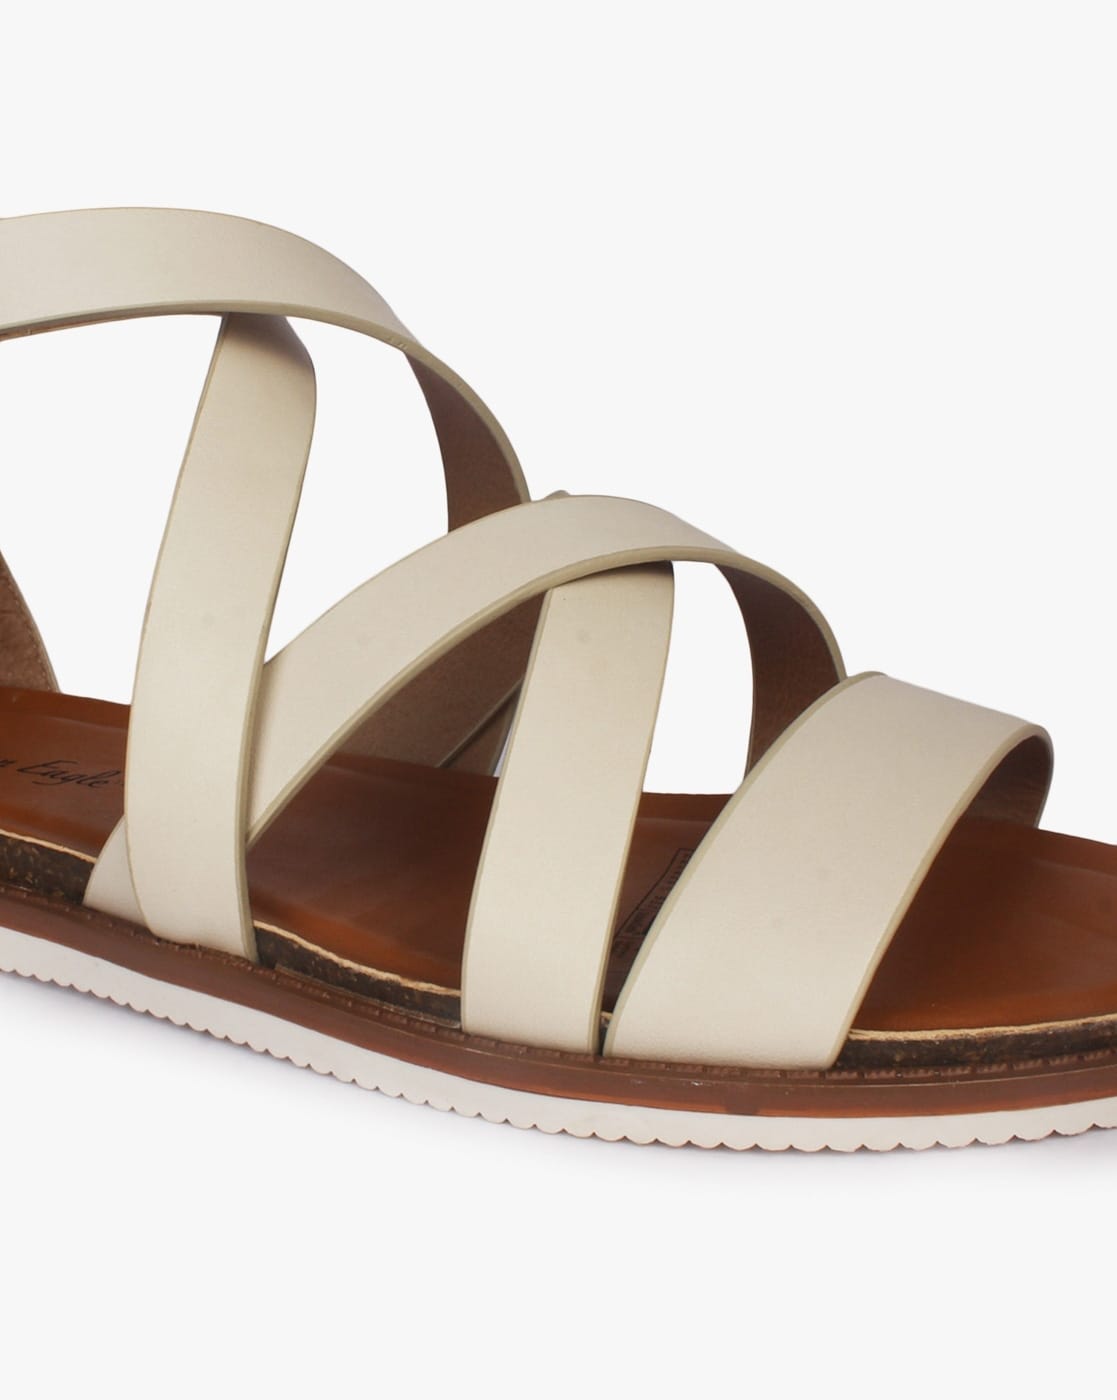 Reese Adjustable Gladiator Sandal - Cognac -Walking Sandal with Arch Support